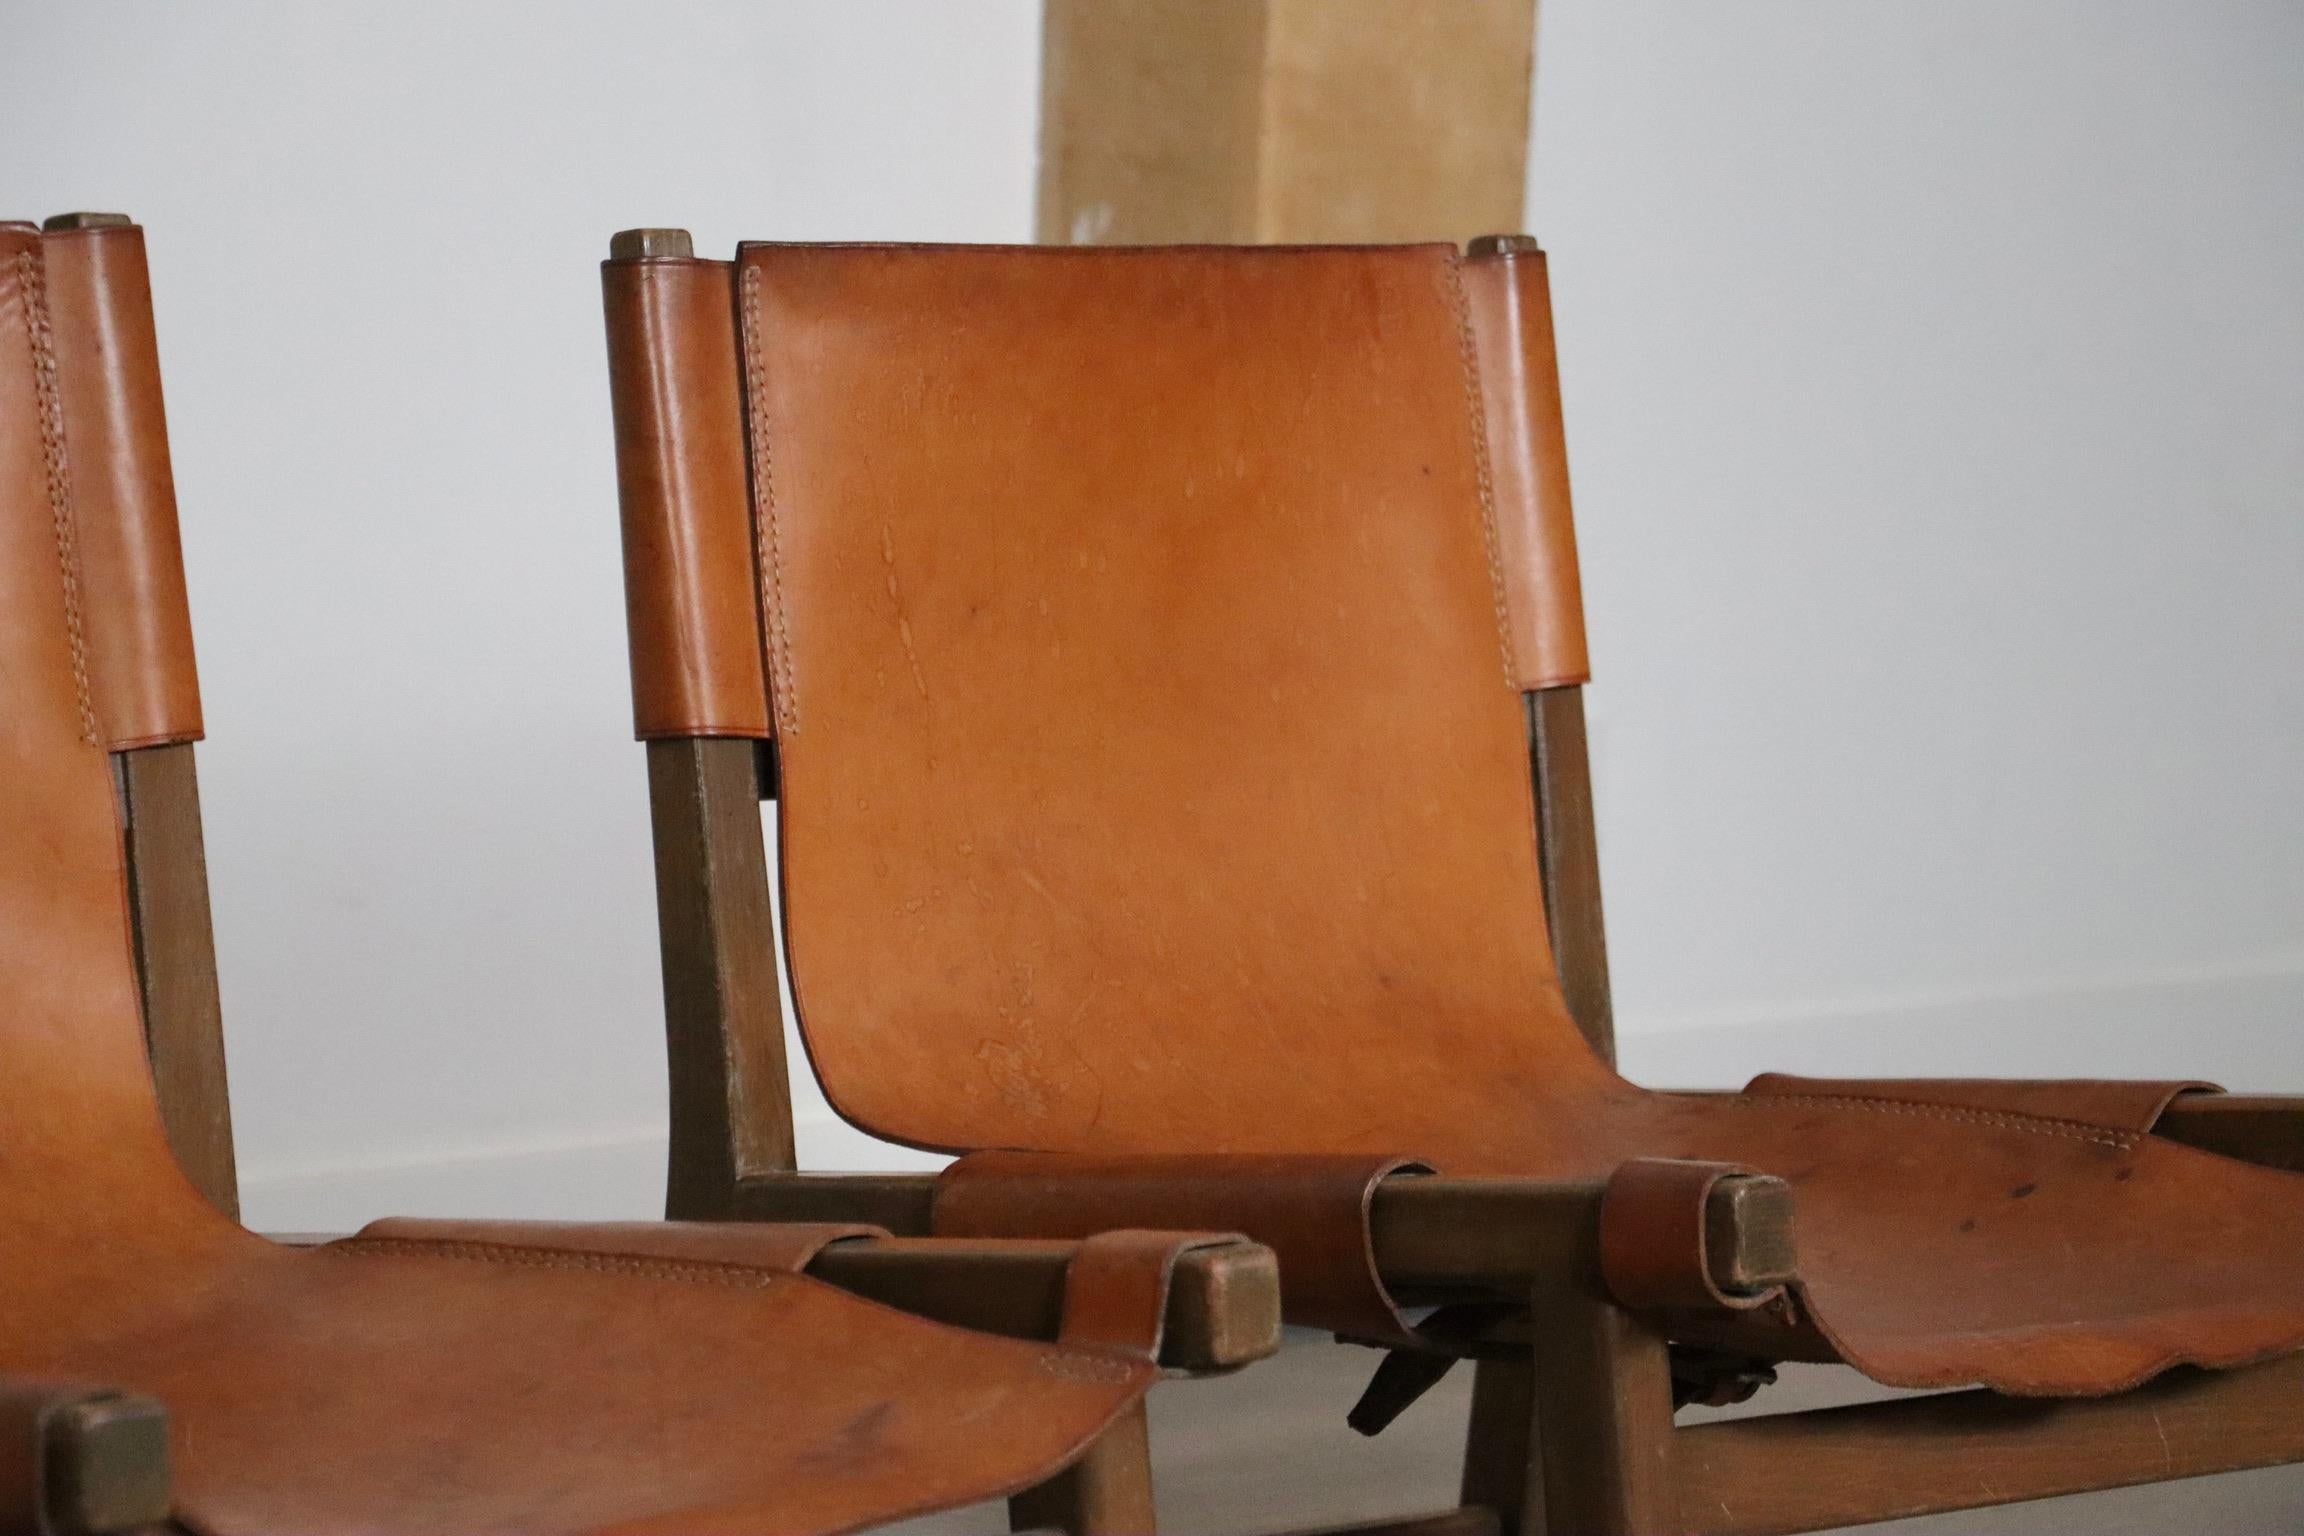 Mid-20th Century Pair Of Riaza Chairs In Cognac Leather By Paco Muñoz For Darro Gallery, Spain, 1 For Sale